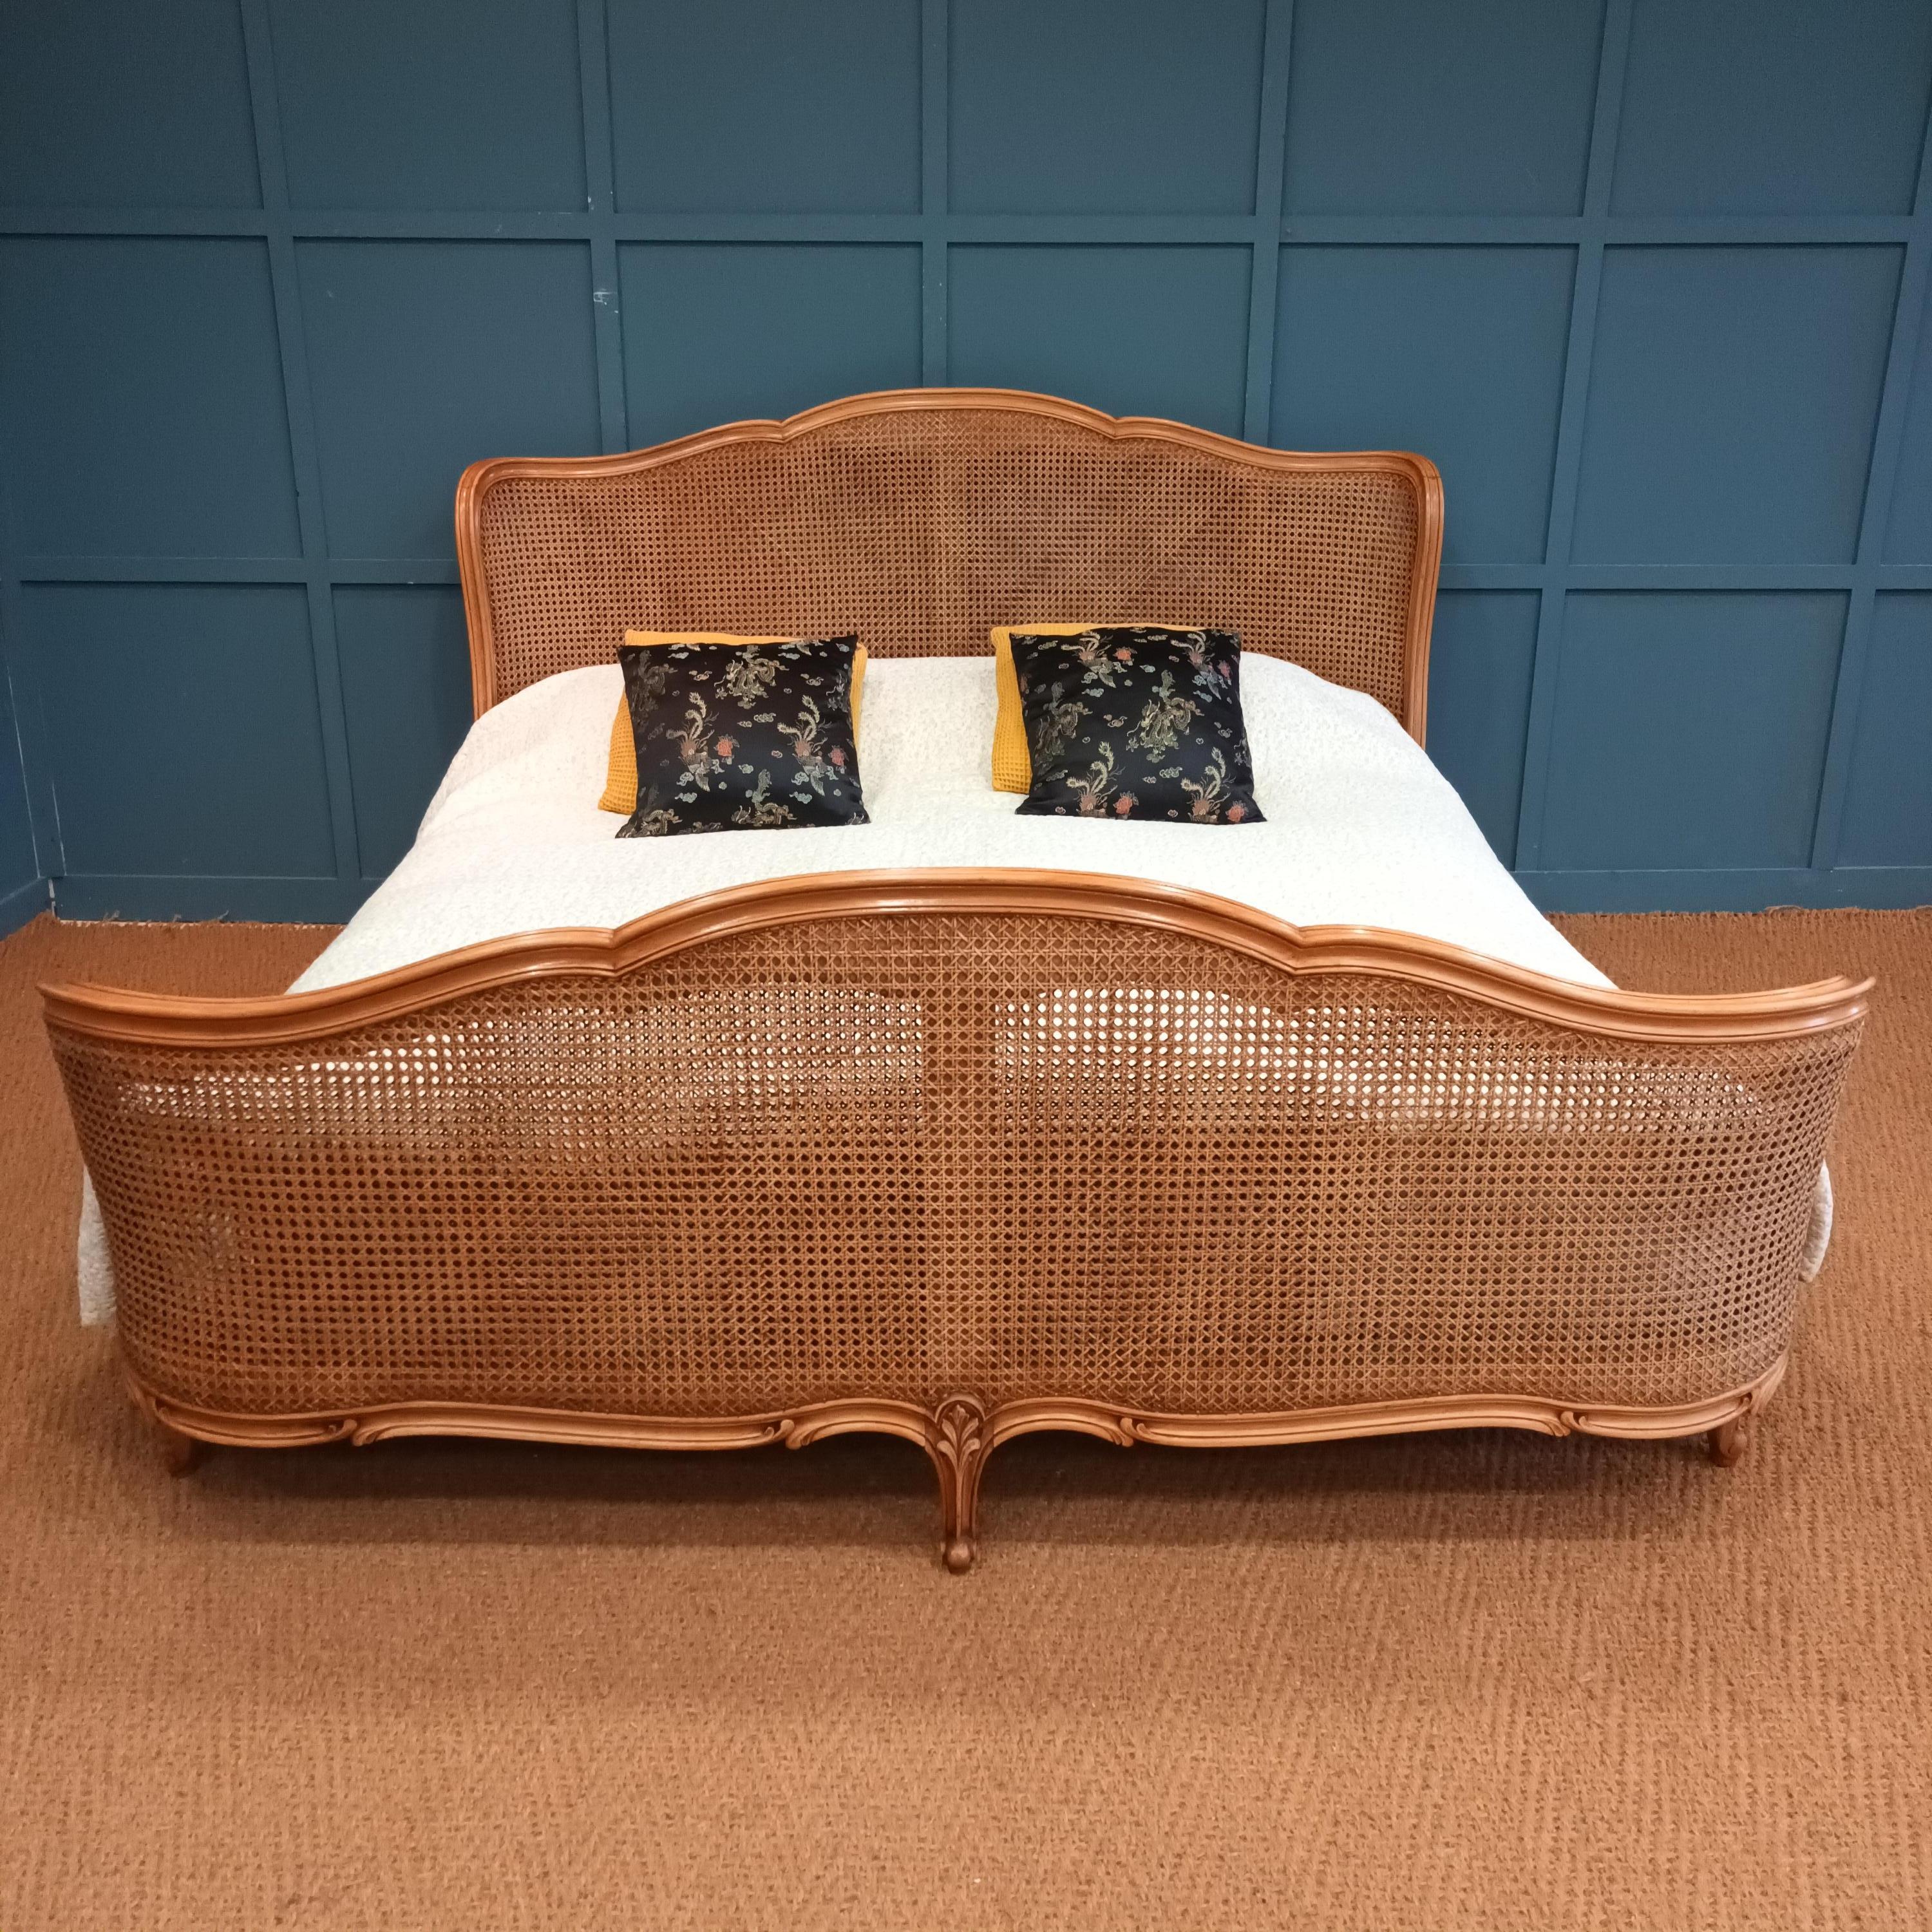 Delightfully elegant French antique bergère bed dating from around the 1900’s. The bed features a full corbeille (both the foot and head ends being curved) and the cane is in perfect condition. The beech frame highlights the cane work and is caned